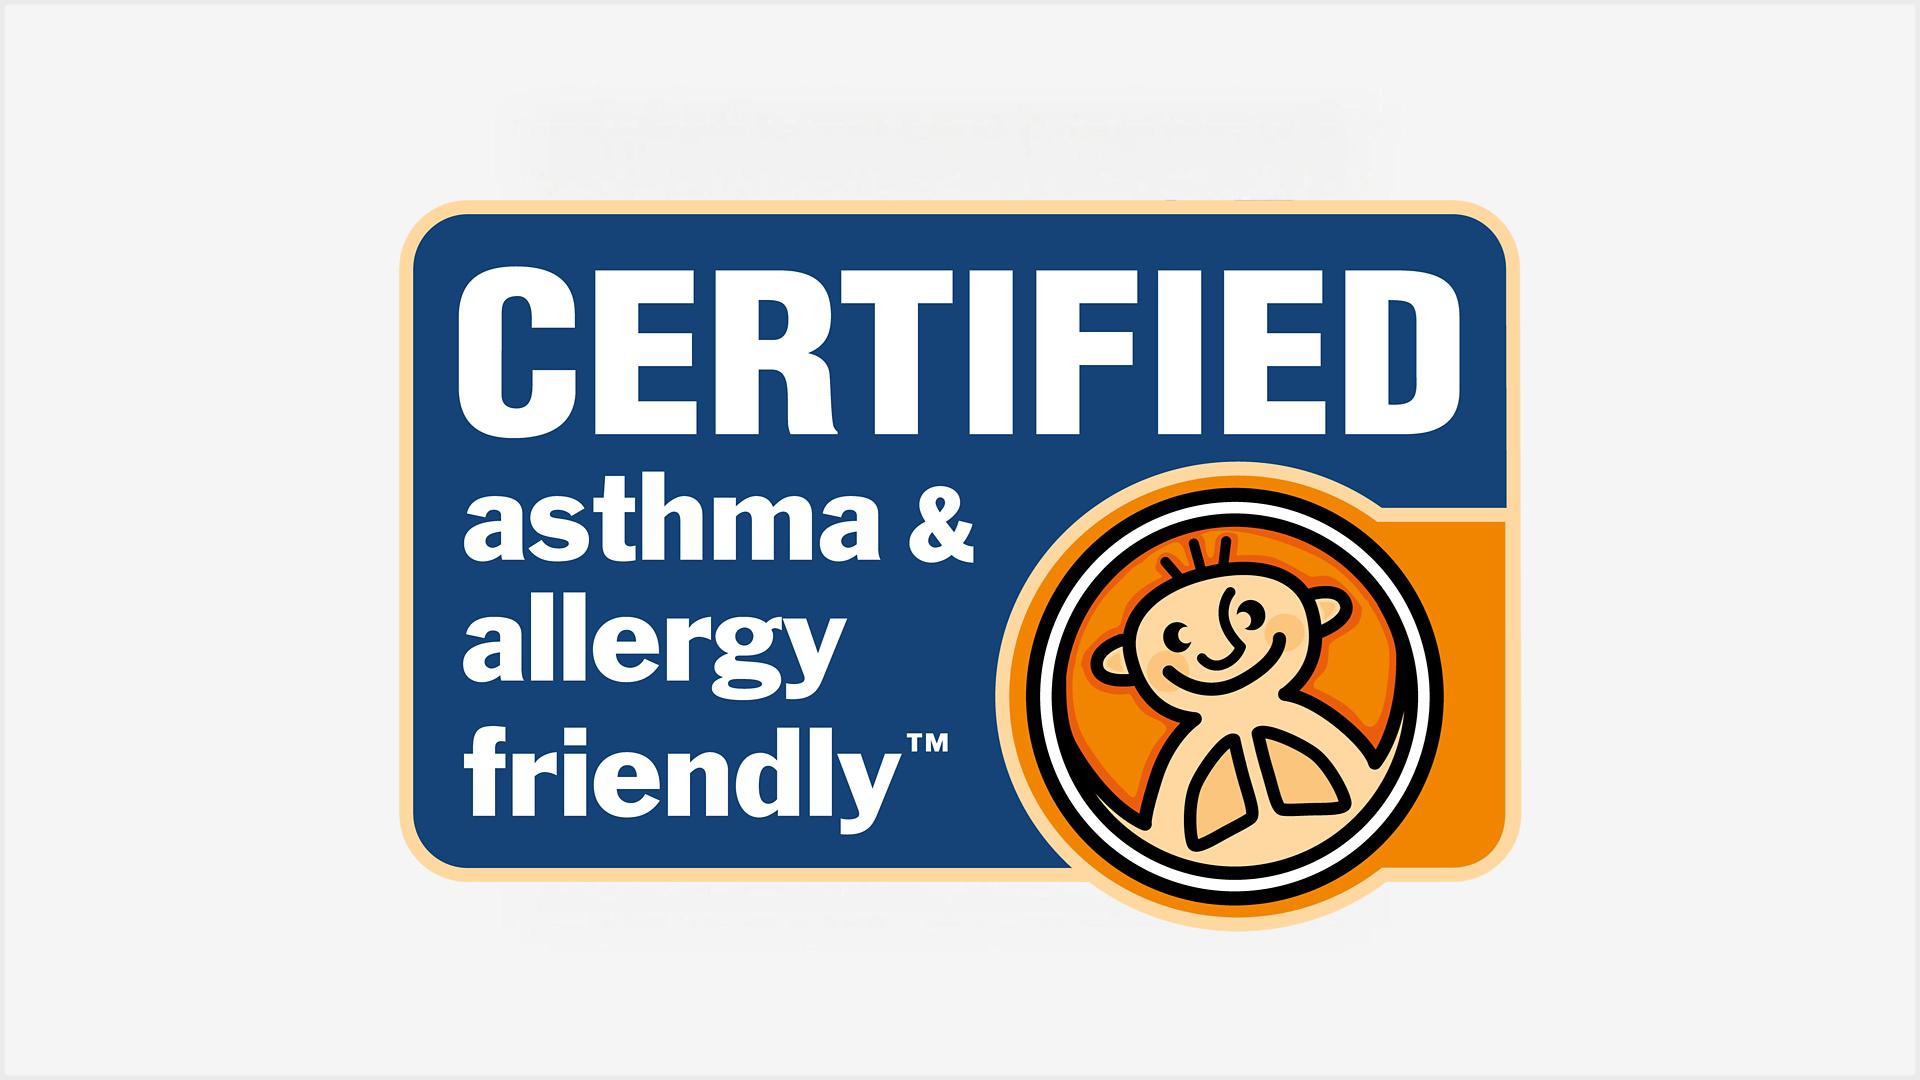 Asthma and allergy friendly Certification Mark